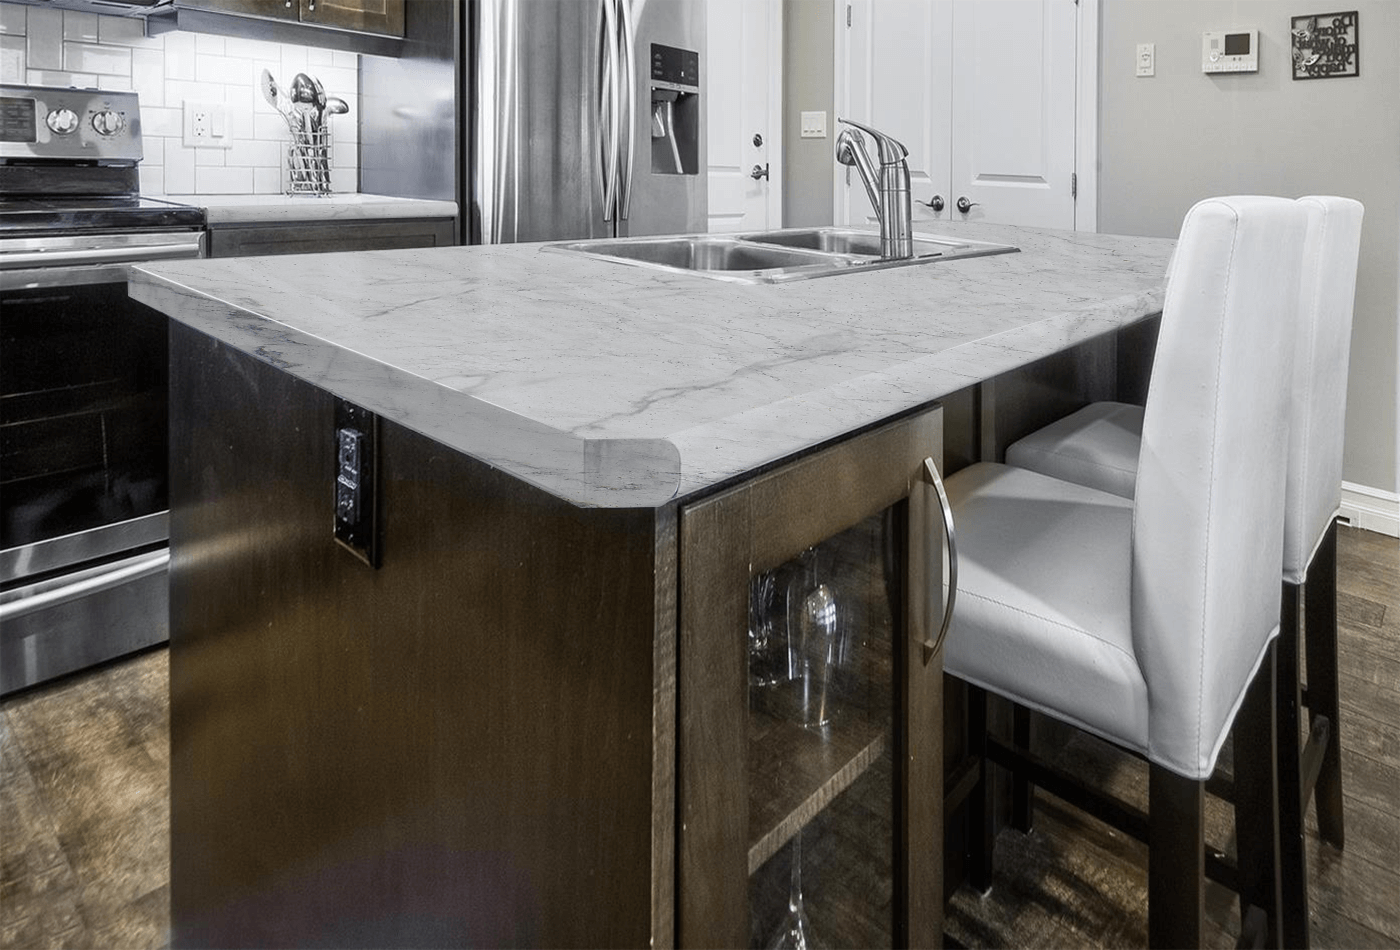 Maintenance and Care of White Granite in a Kitchen